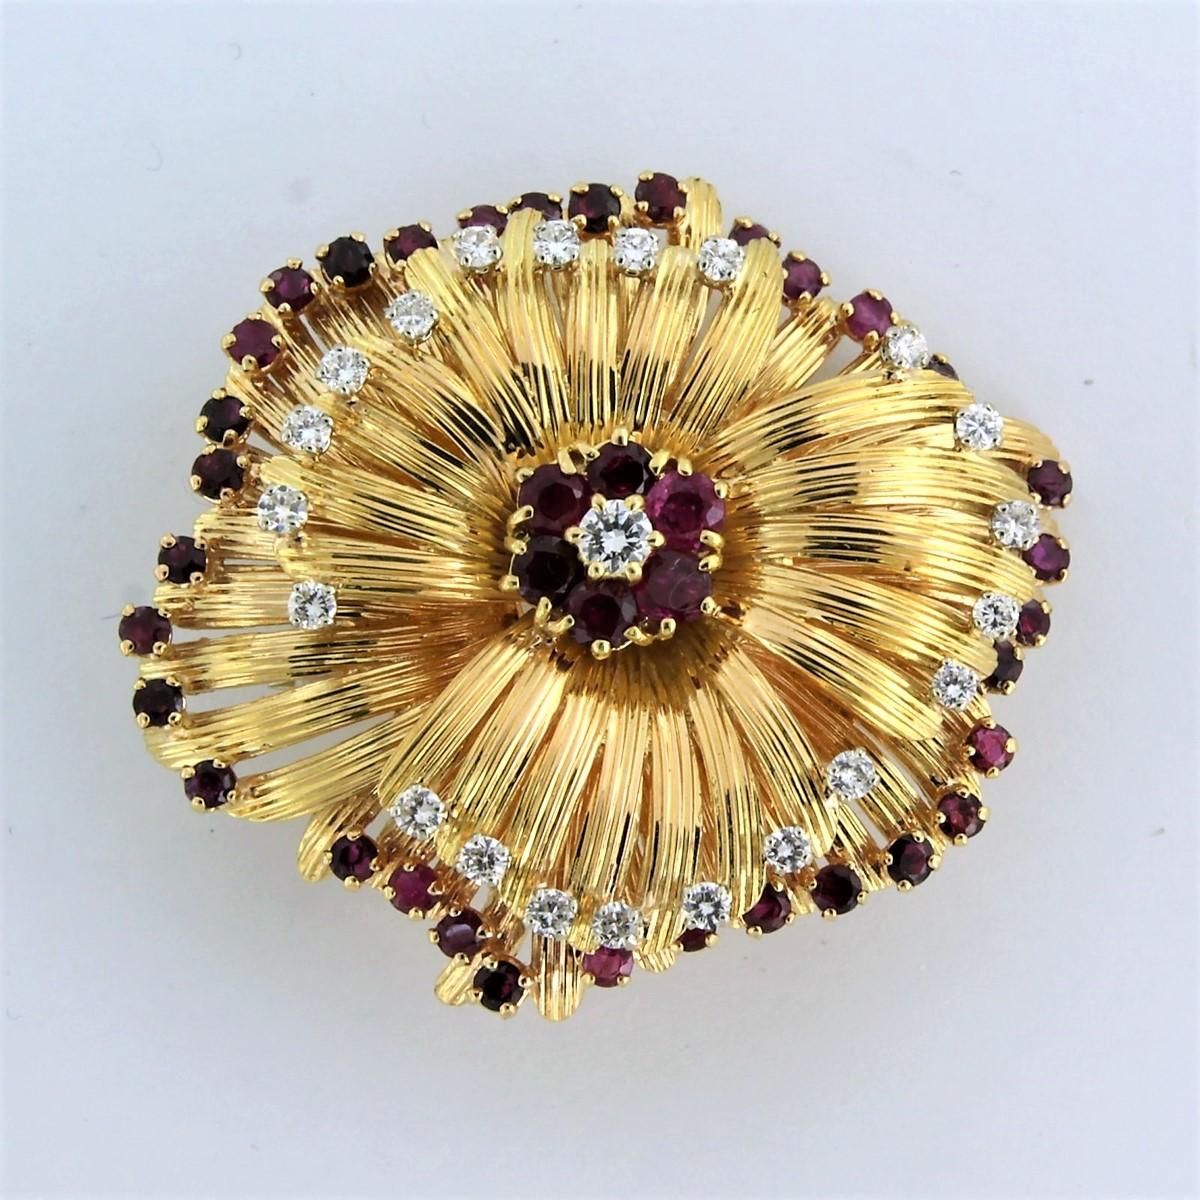 18K yellow gold brooch set with ruby ​​and brilliant cut diamond. 1.00ct - F/G - VS/SI

detailed description:

the size of the brooch is 4.8 cm by 4.1 cm wide

Weight 28.5 grams

Occupied with

- 6 x 3.0 mm round facet cut ruby, approximately 0.30